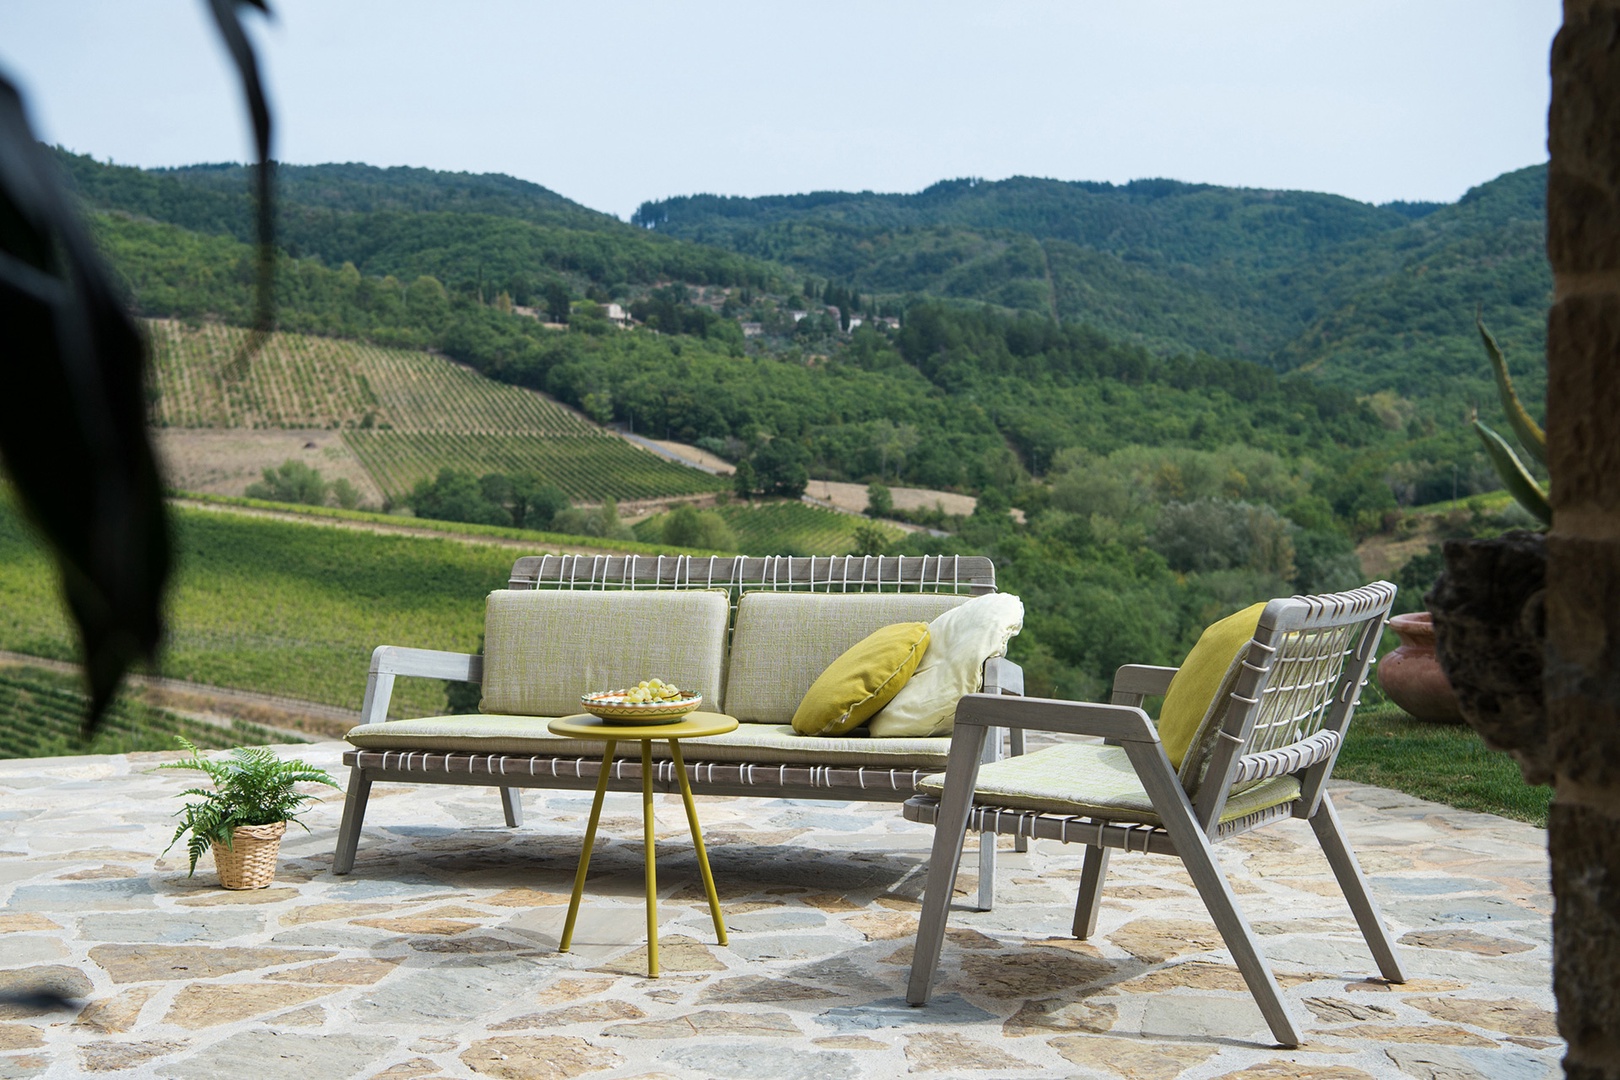 Breathtaking views of the hillside and vineyards